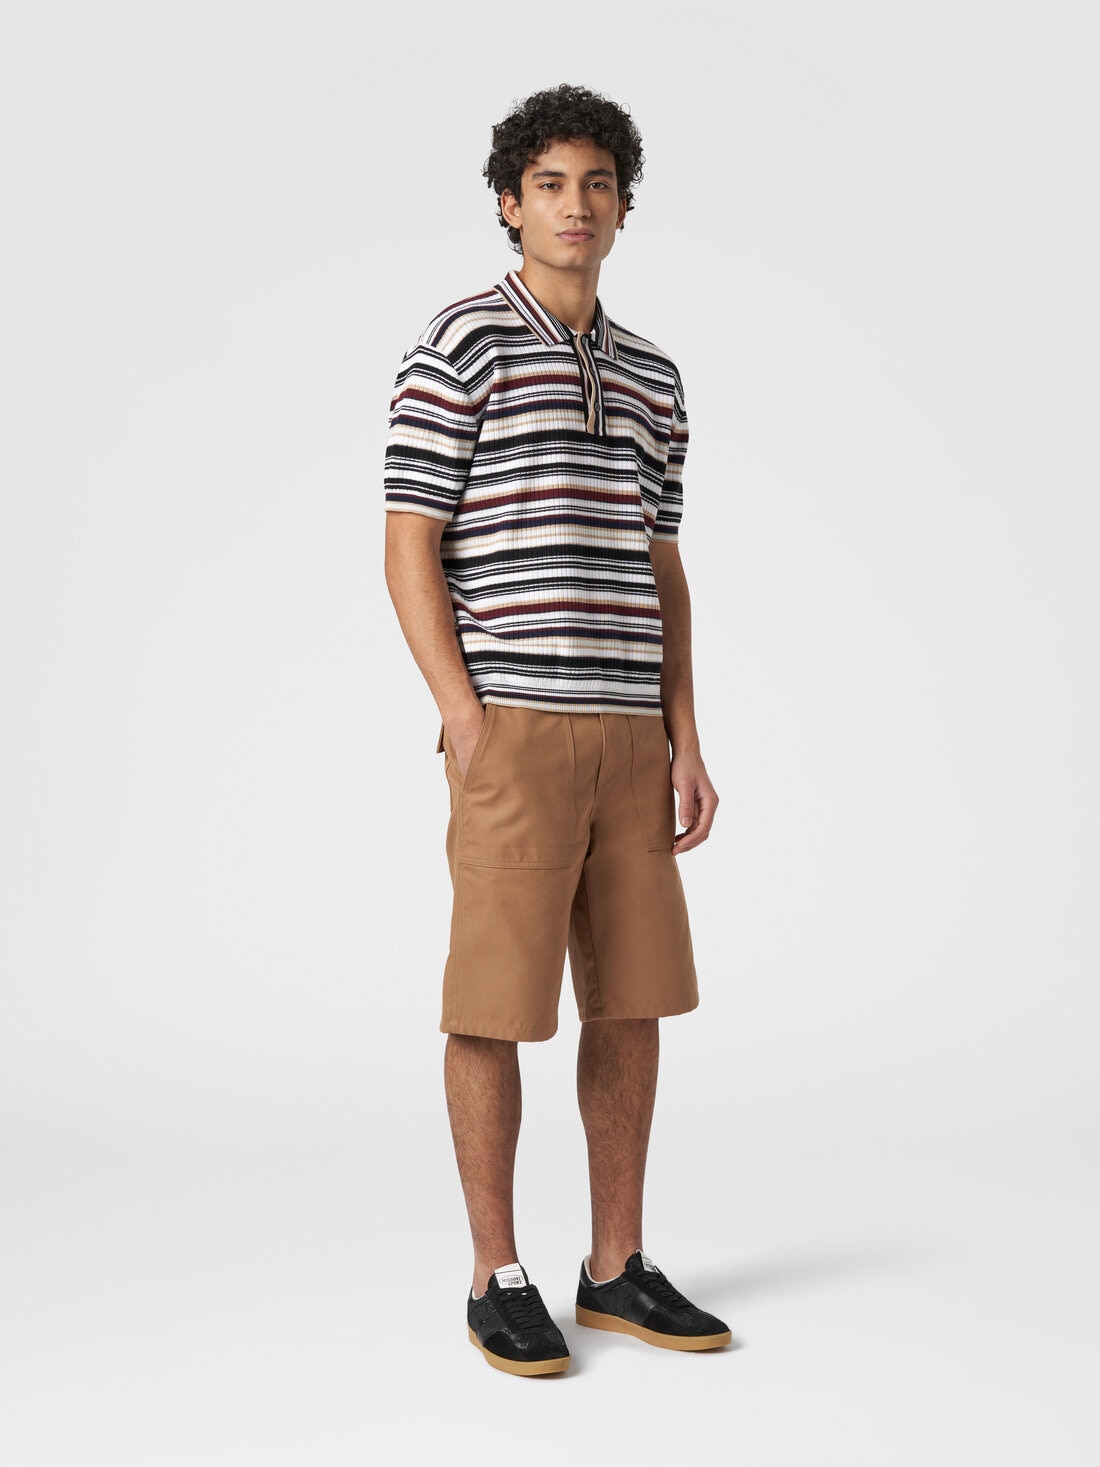 Polo shirt in striped cotton , Multicoloured  - US24S20DBK034USM9AD - 1